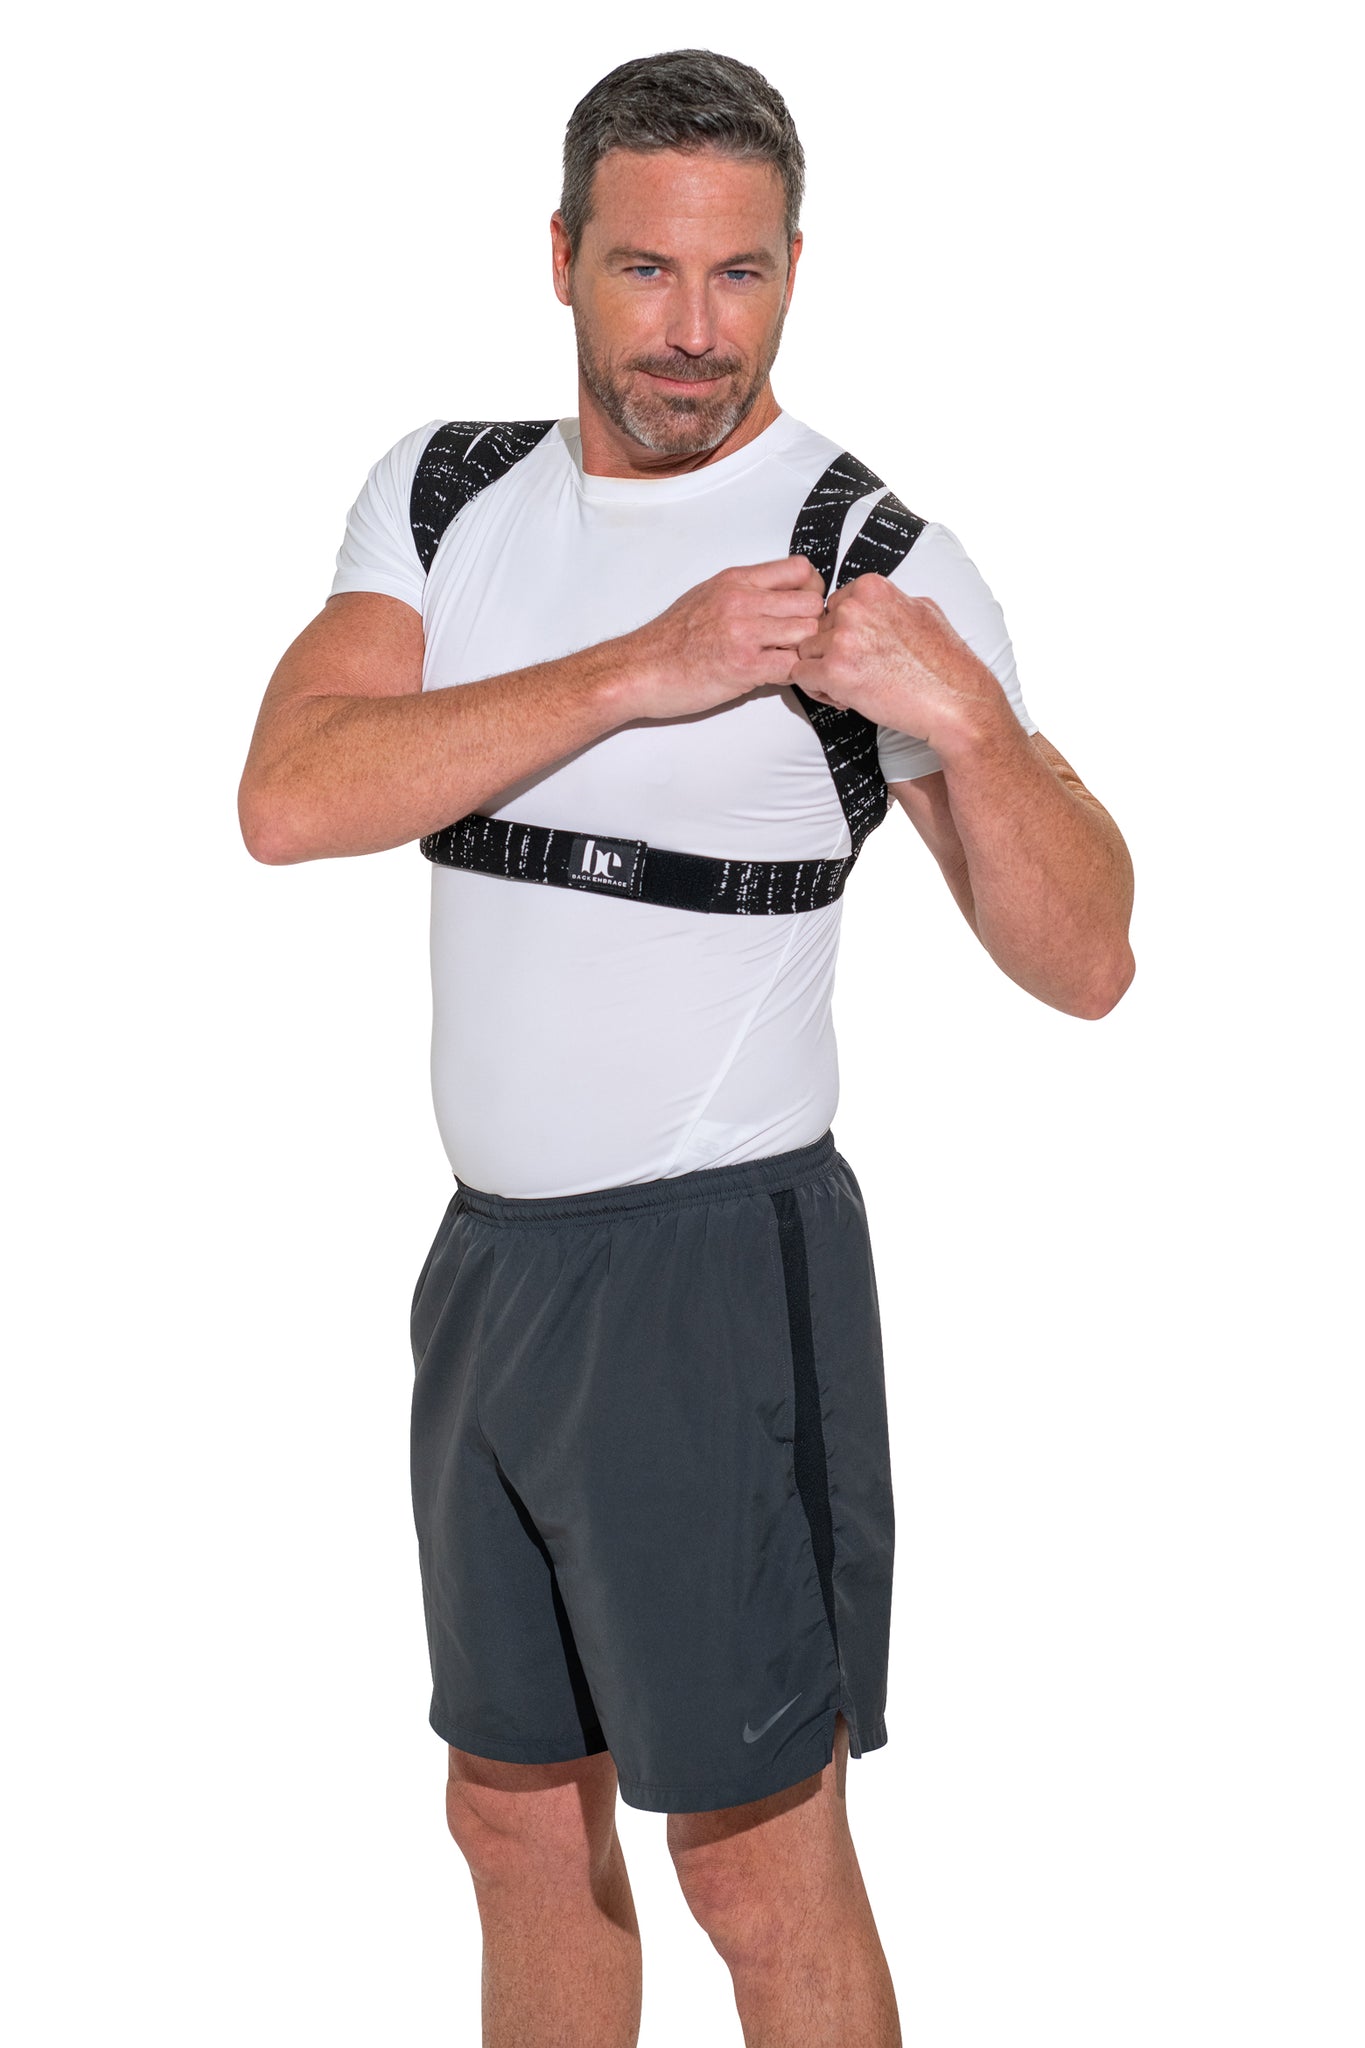 Posture Corrector FAQs: Top Questions Answered – BackEmbrace